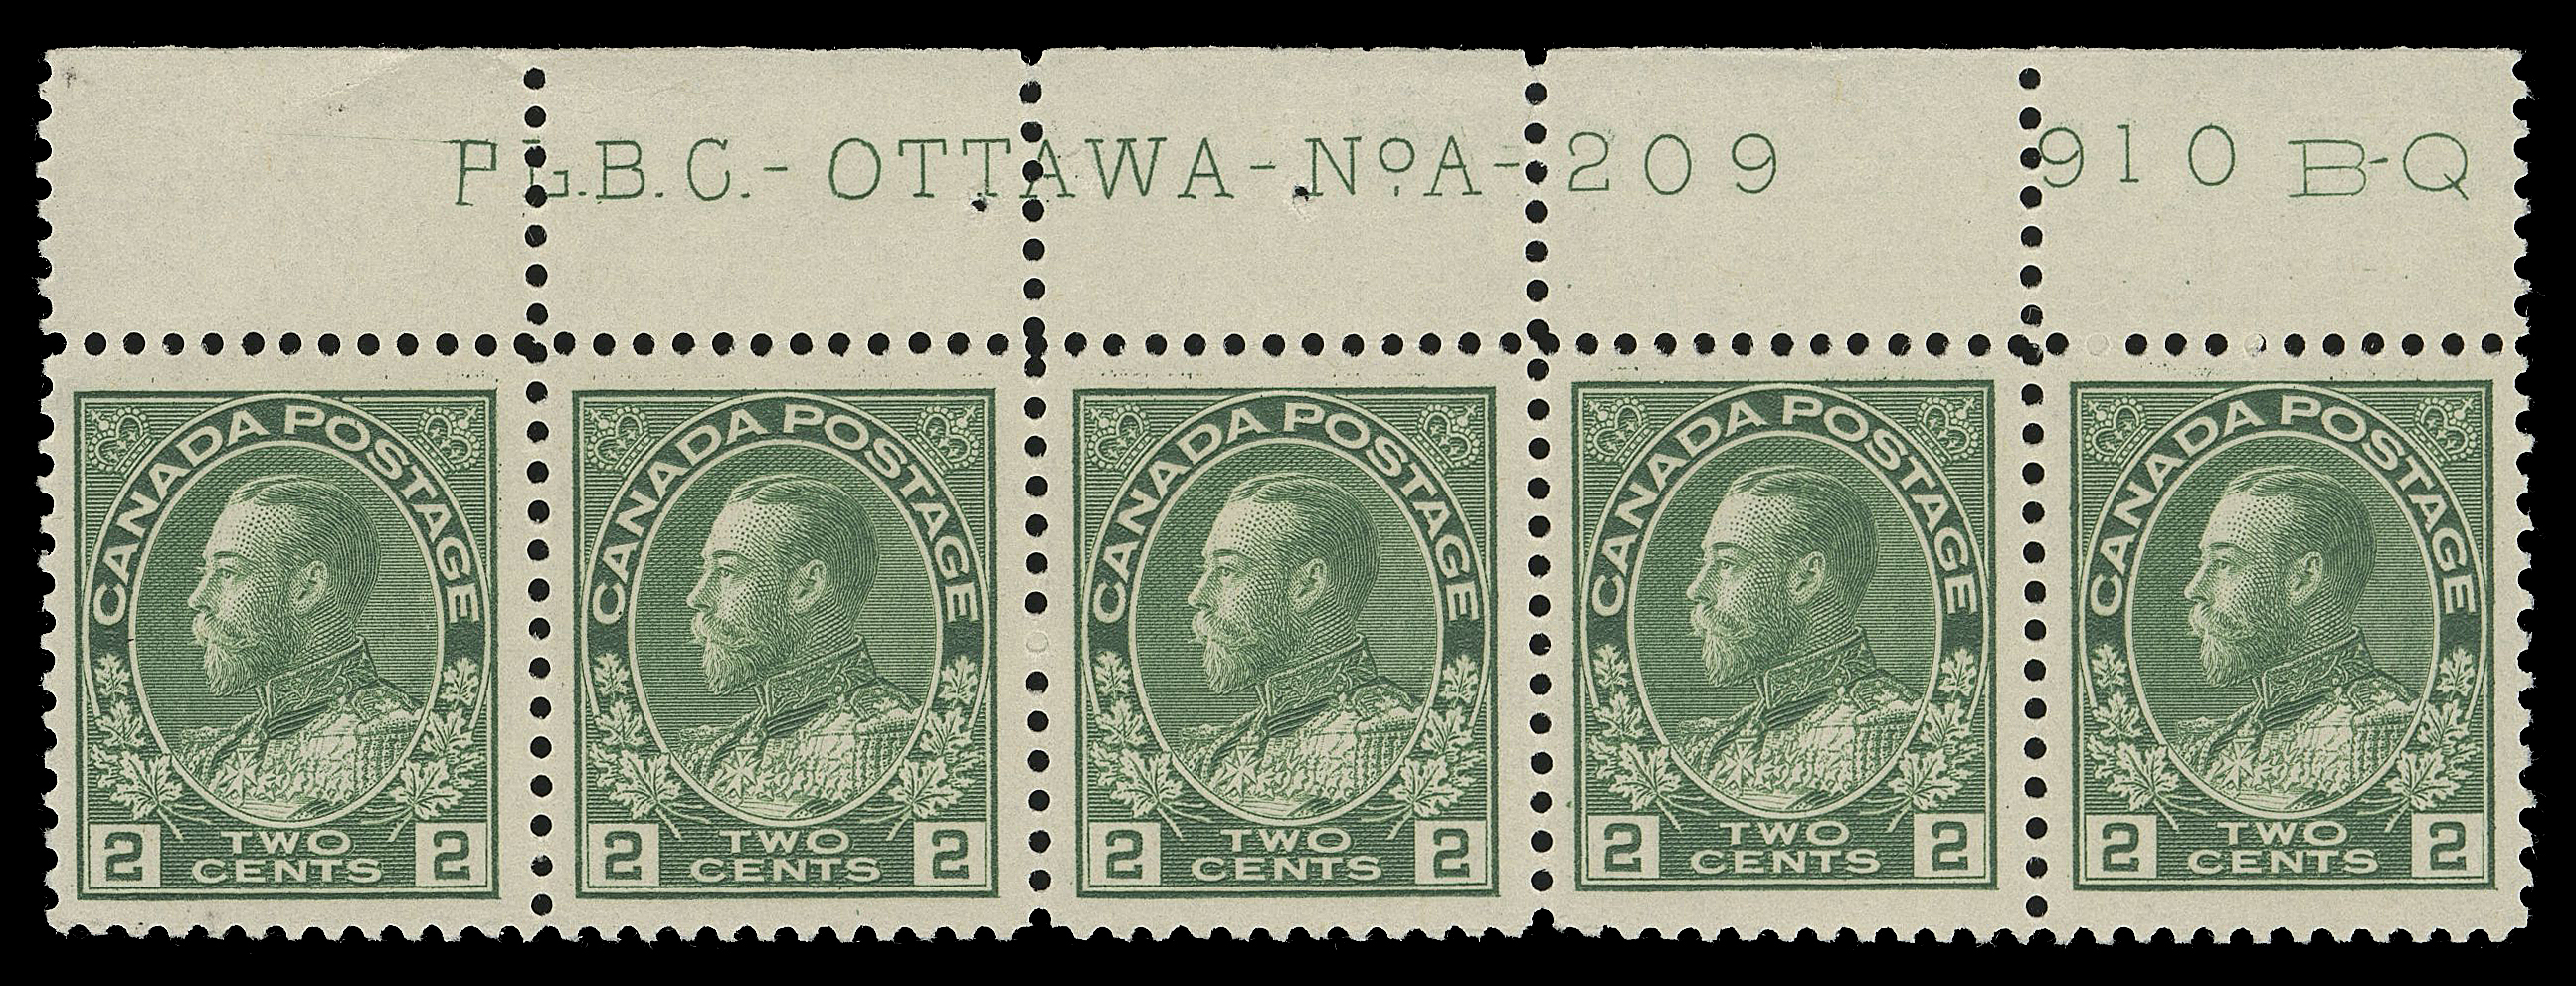 ADMIRAL STAMPS  107iv,A trio of consecutive plate number strips of five - UR Plate 209 with etched "P" at left of "L.B.C.", UL Plate 210 and UL Plate 211, fresh and F-VF NH (Unitrade cat. $1,155)